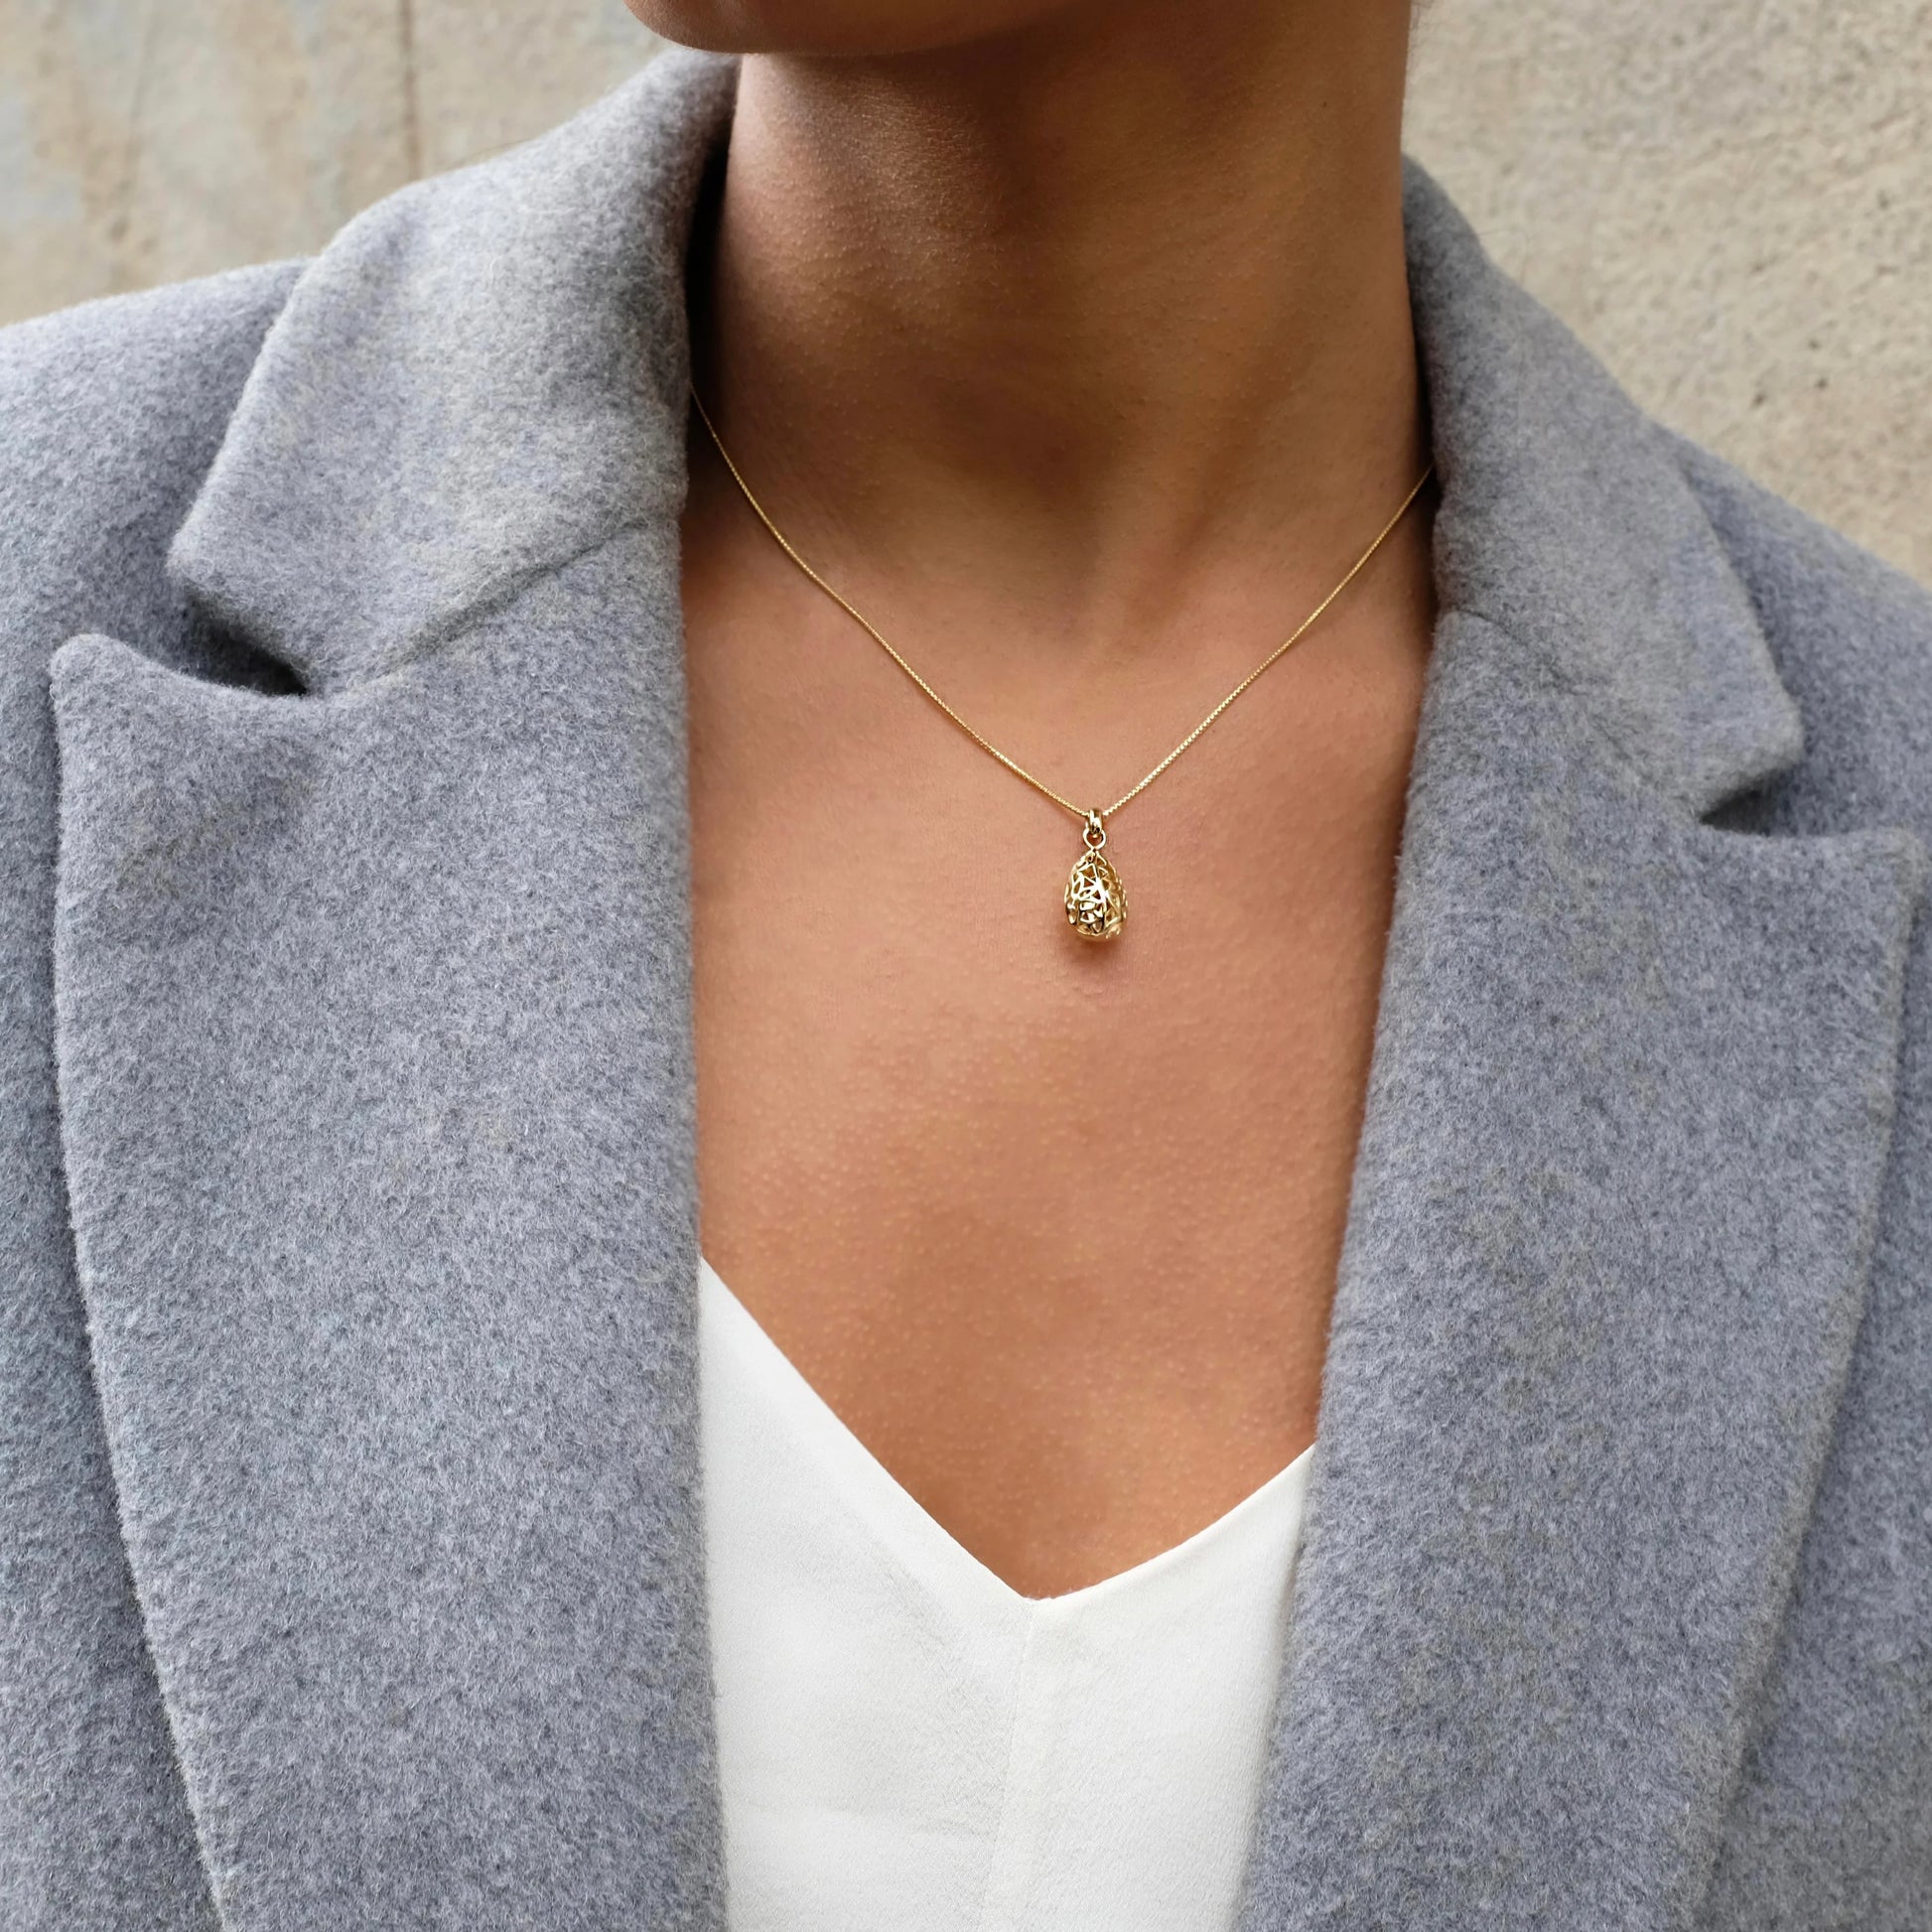 Najo - Necklace Cutout Teardrop Gold - The Ivy Room Adelaide